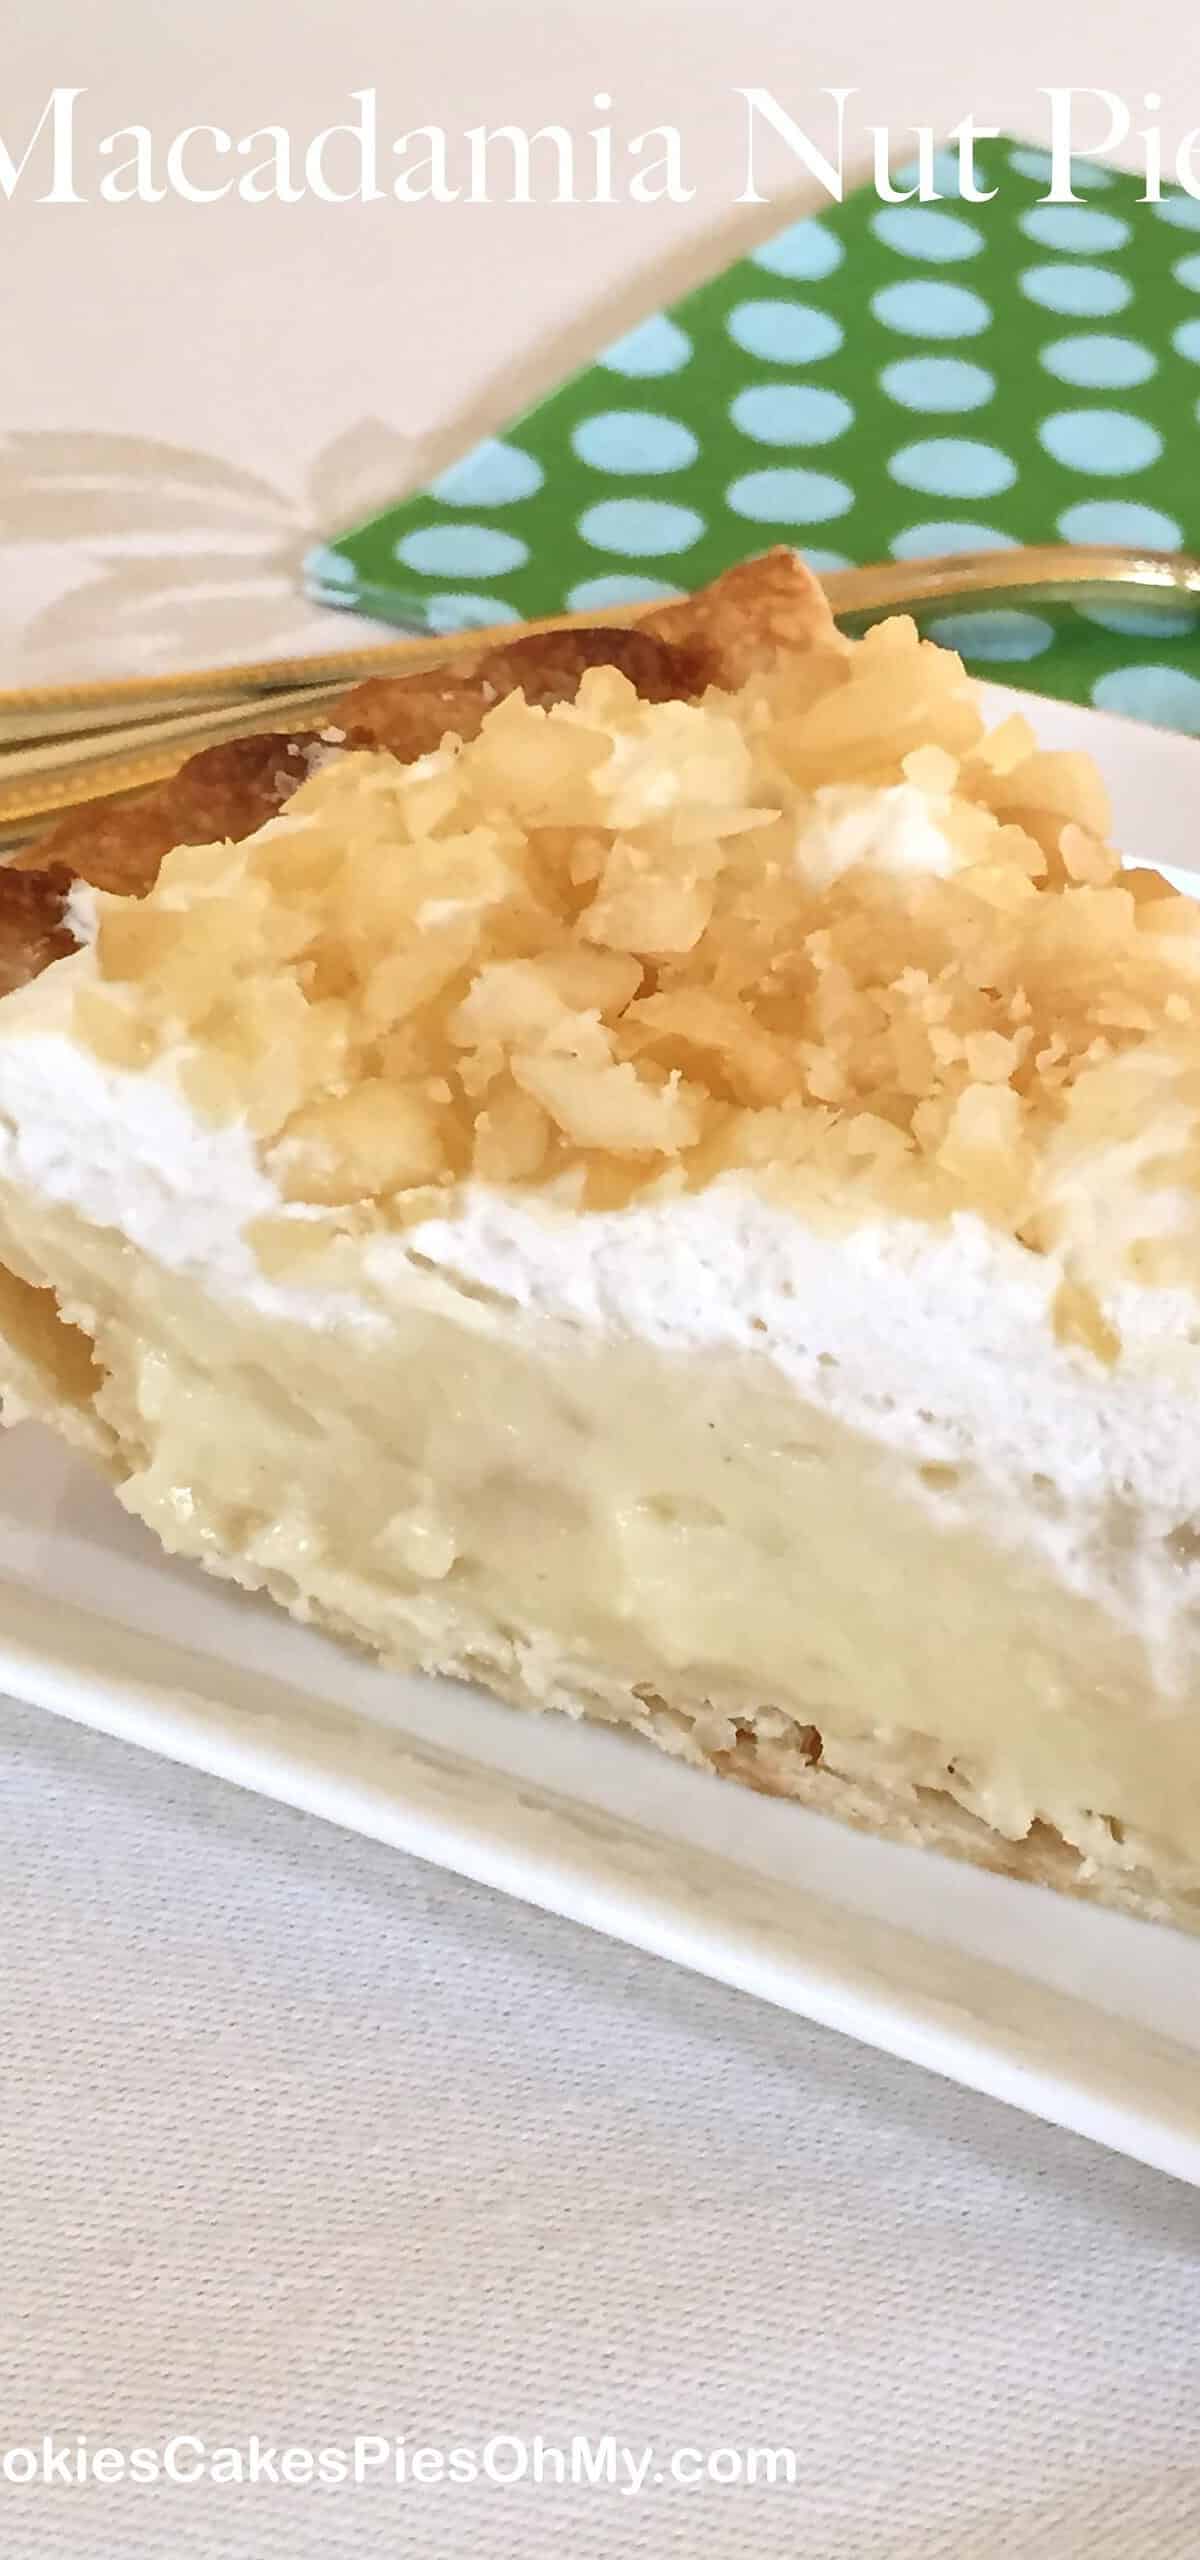  Indulge in a slice of creamy heaven with our Macadamia Nut Cream Pie